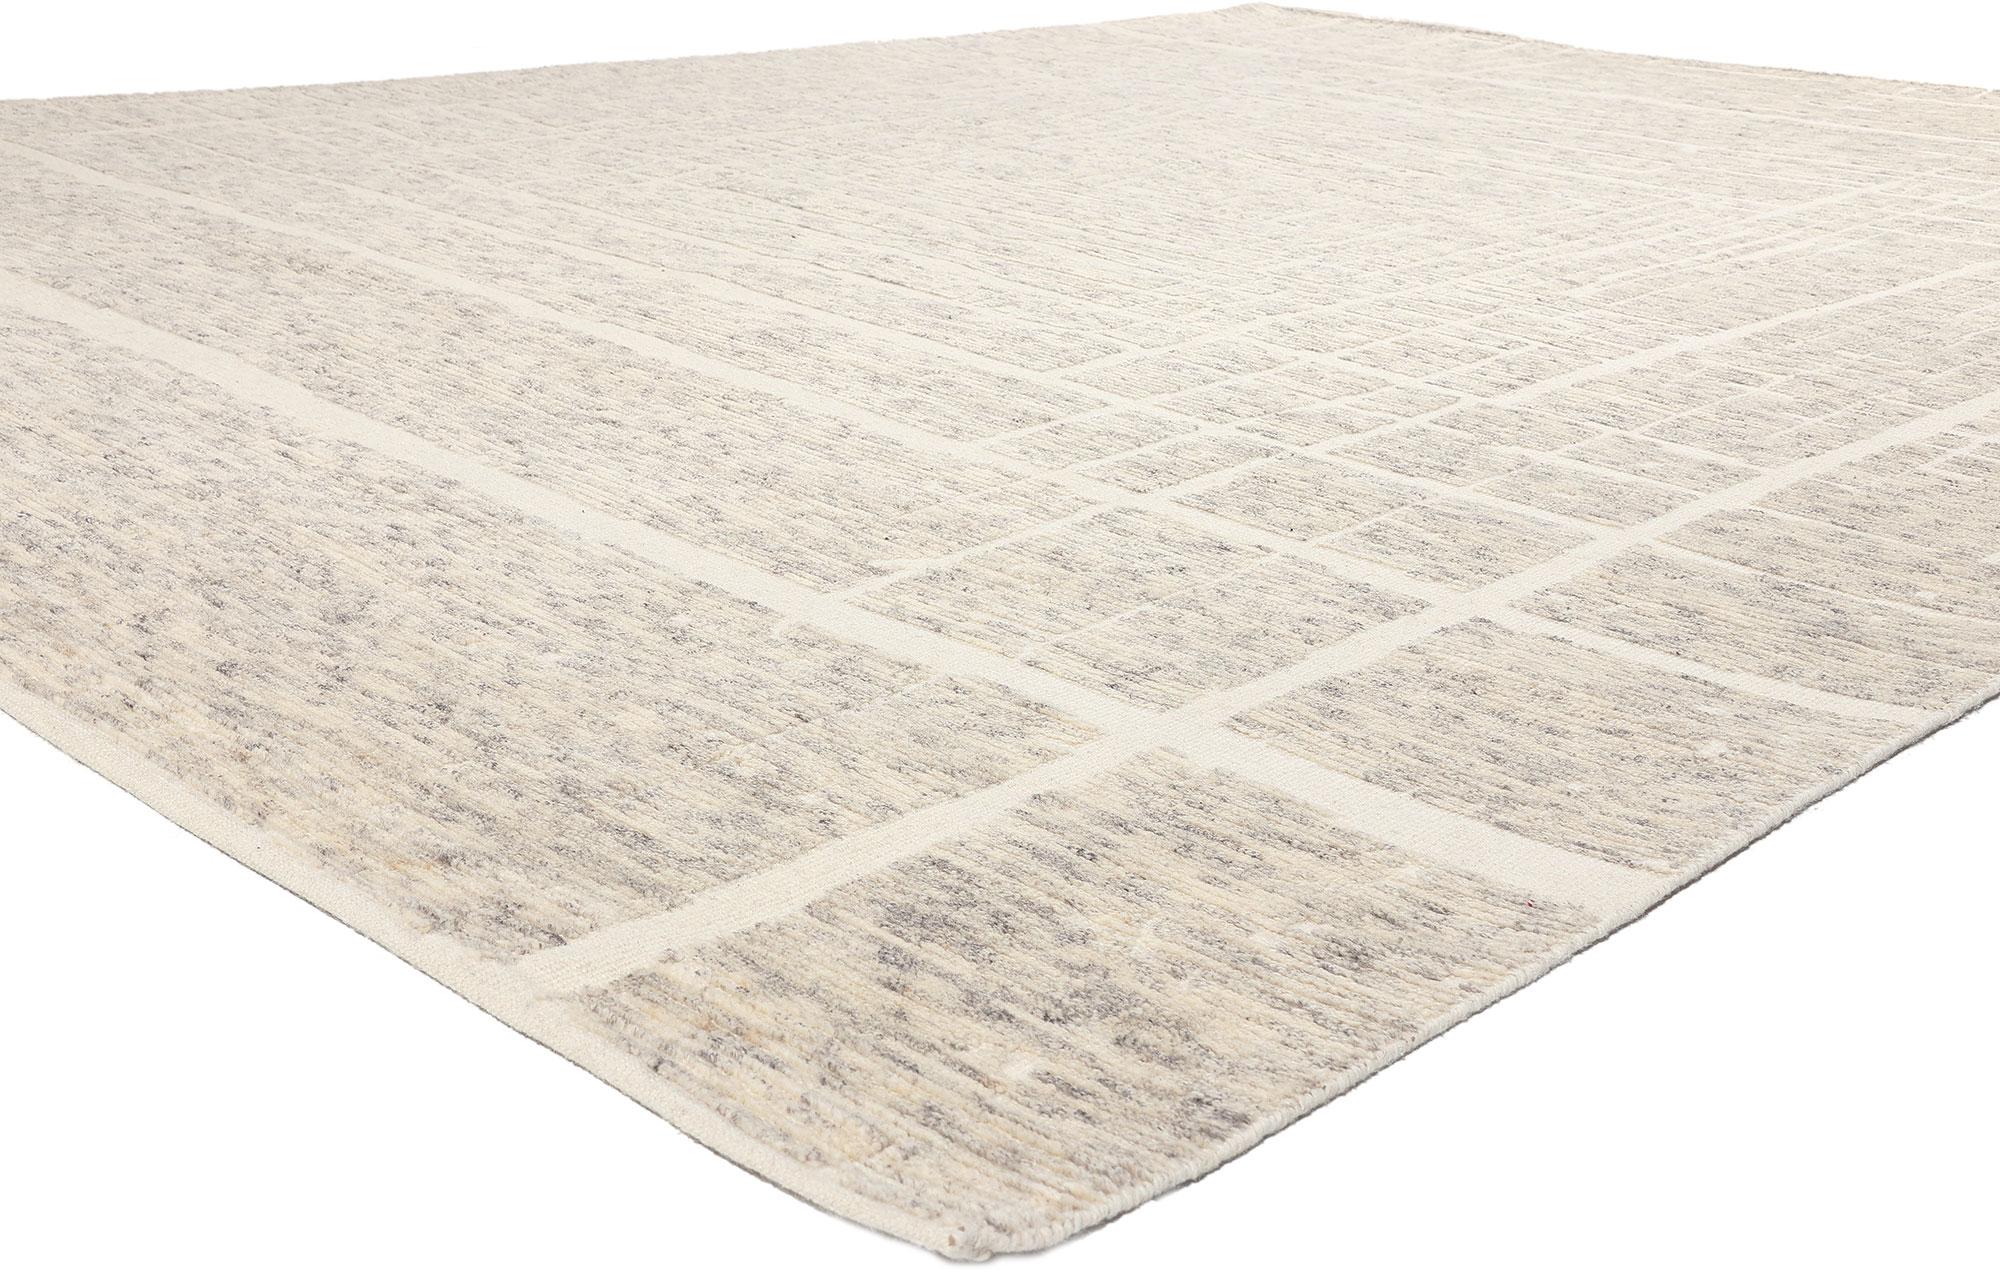 30988 Organic Modern High-Low Rug, 10'04 x 13'11.
Abstract Expressionism meets subtle Shibui in this neutral organic modern geometric high-low rug. The intrinsic cubist design and neutral earth-tone colors woven into this piece work together